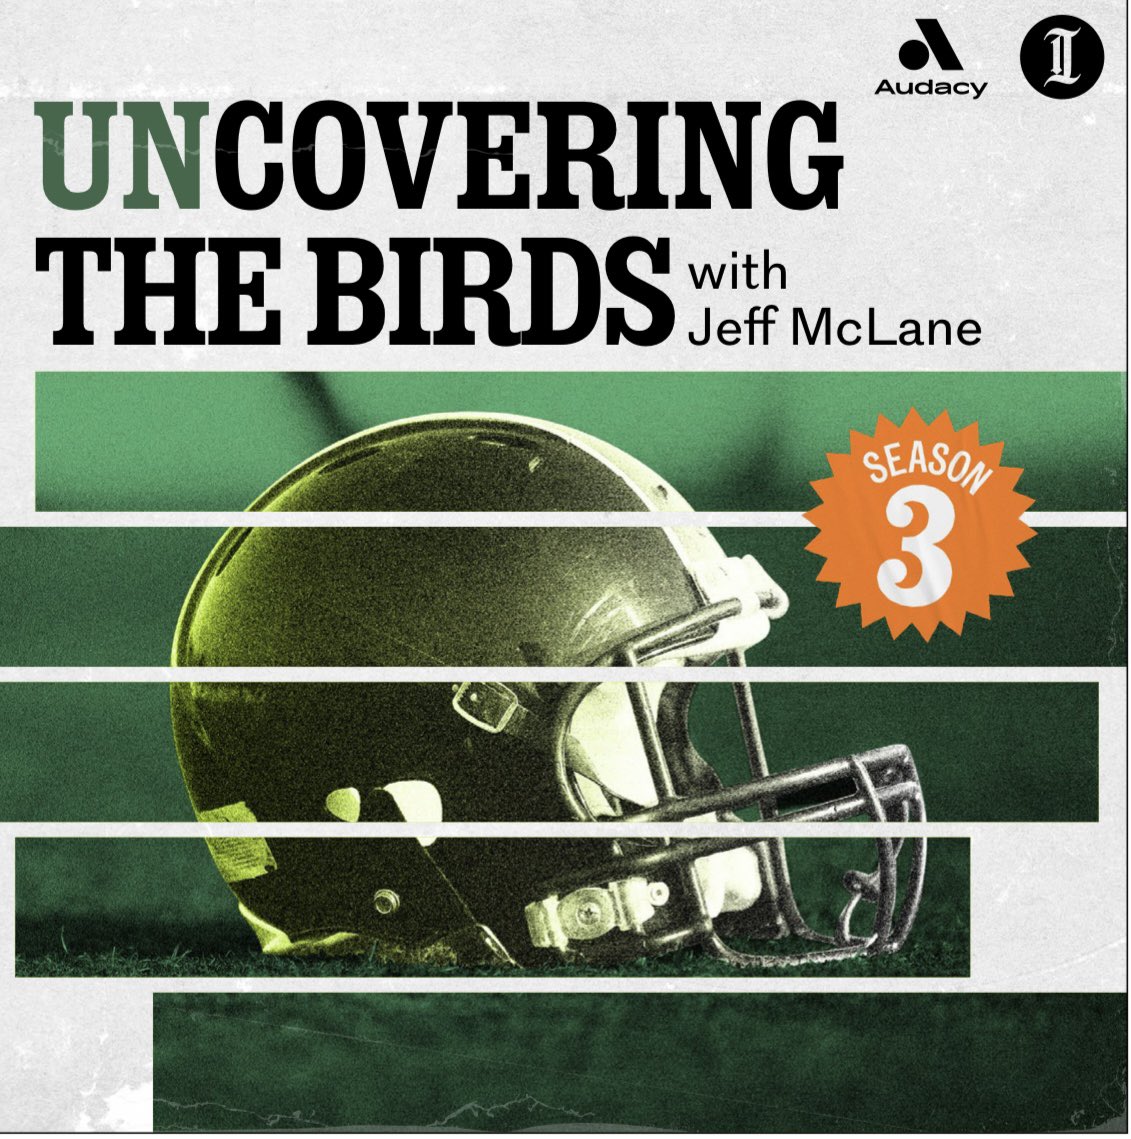 Season 3 of “unCovering the Birds” starts next week … But first, an impression, a response, and some teasers in the trailer for my #Eagles narrative series podcast as we embark on another season of untold stories about your favorite team: omny.fm/shows/uncoveri…